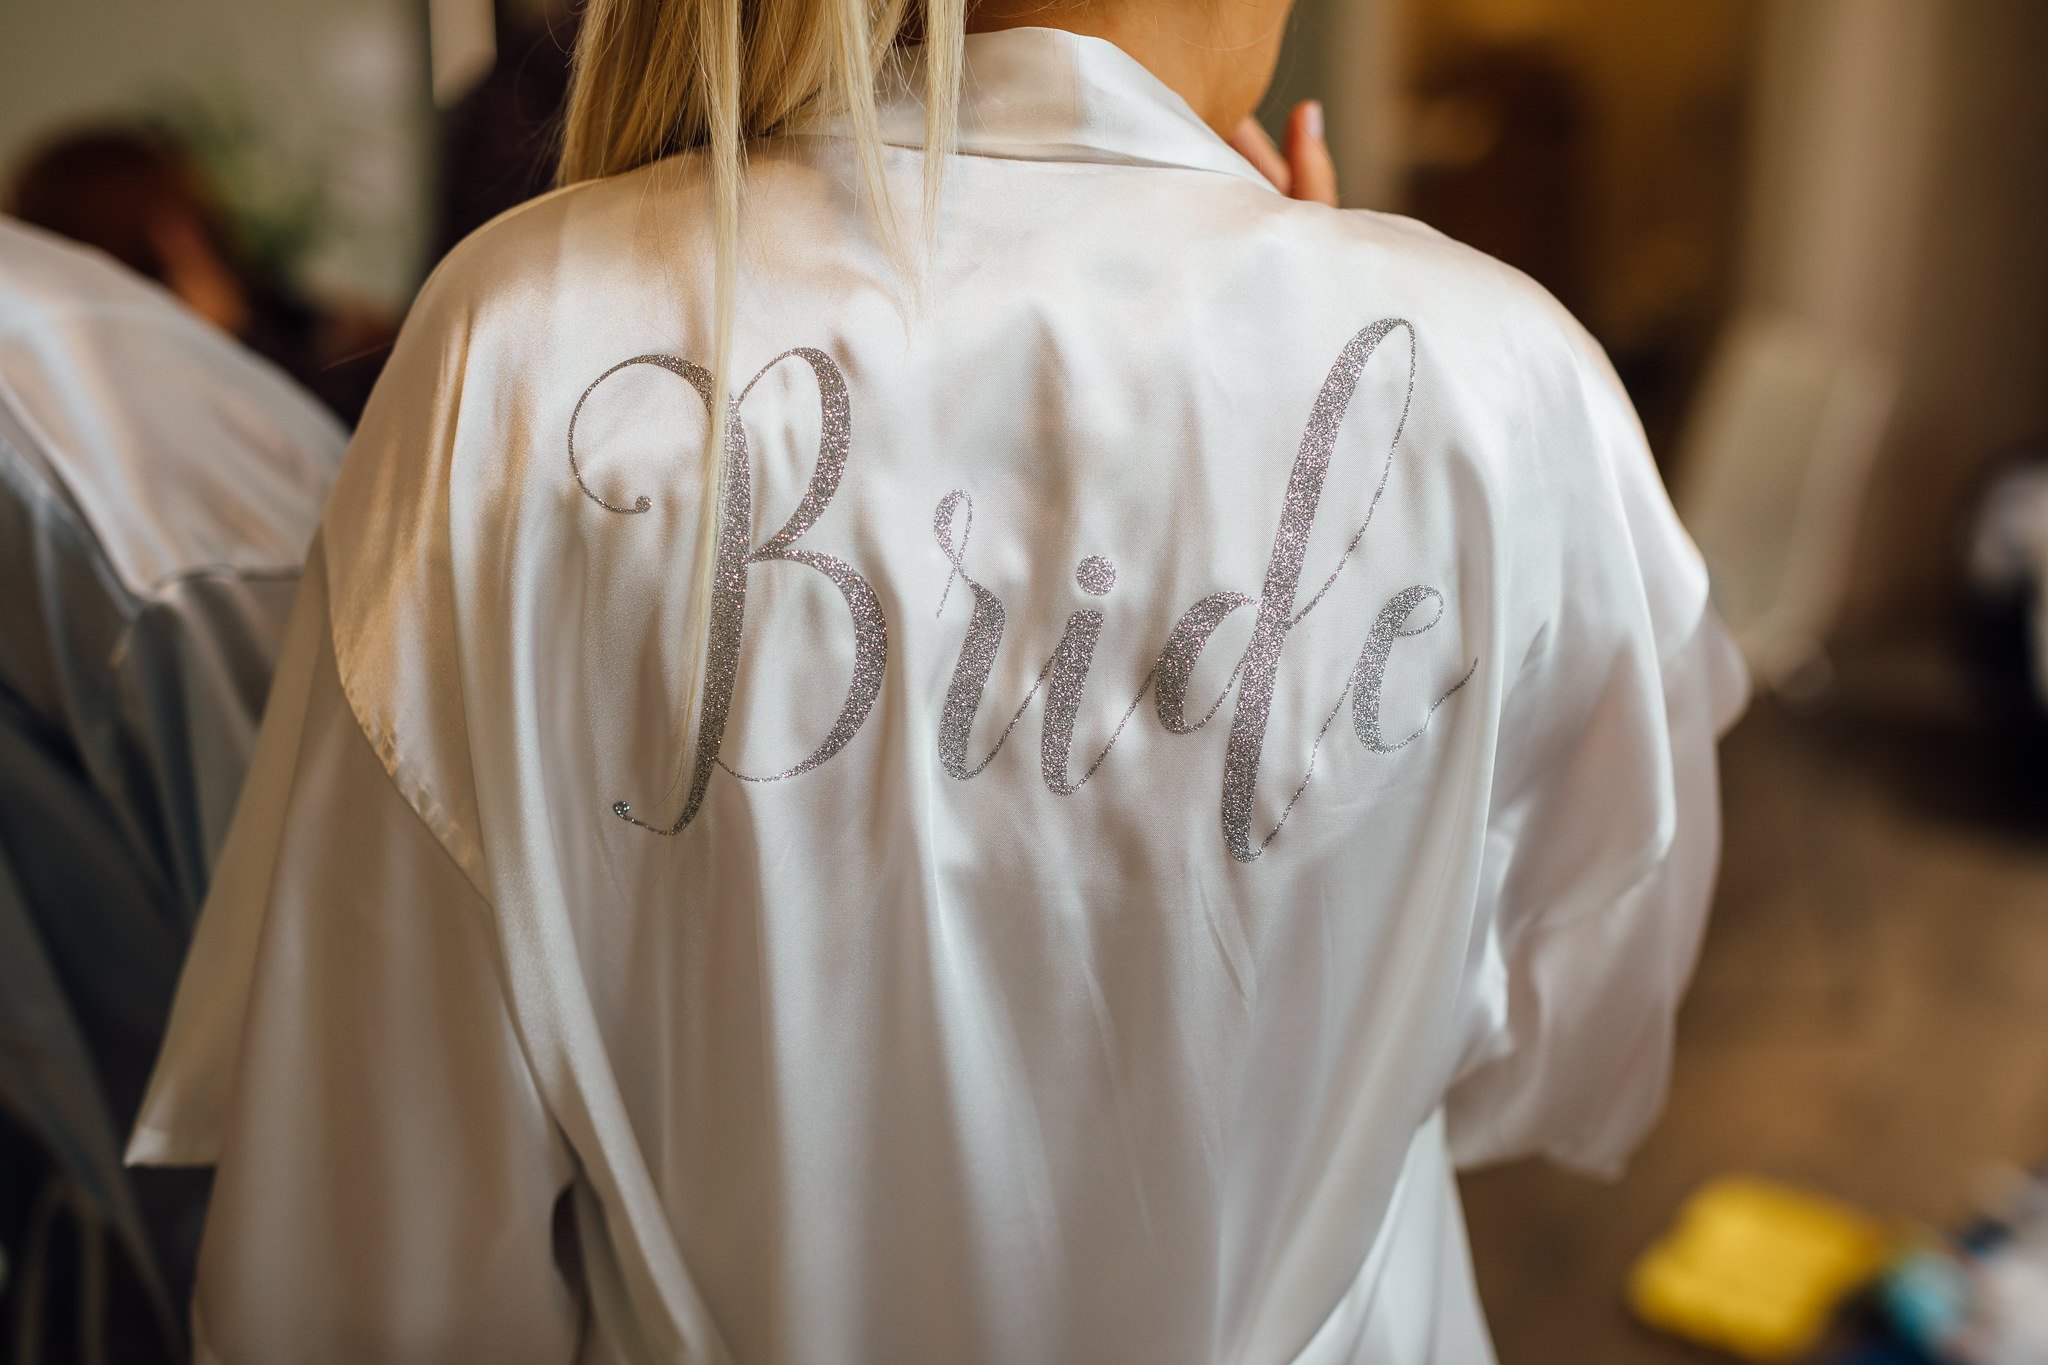  The Bride’s dressing gown 